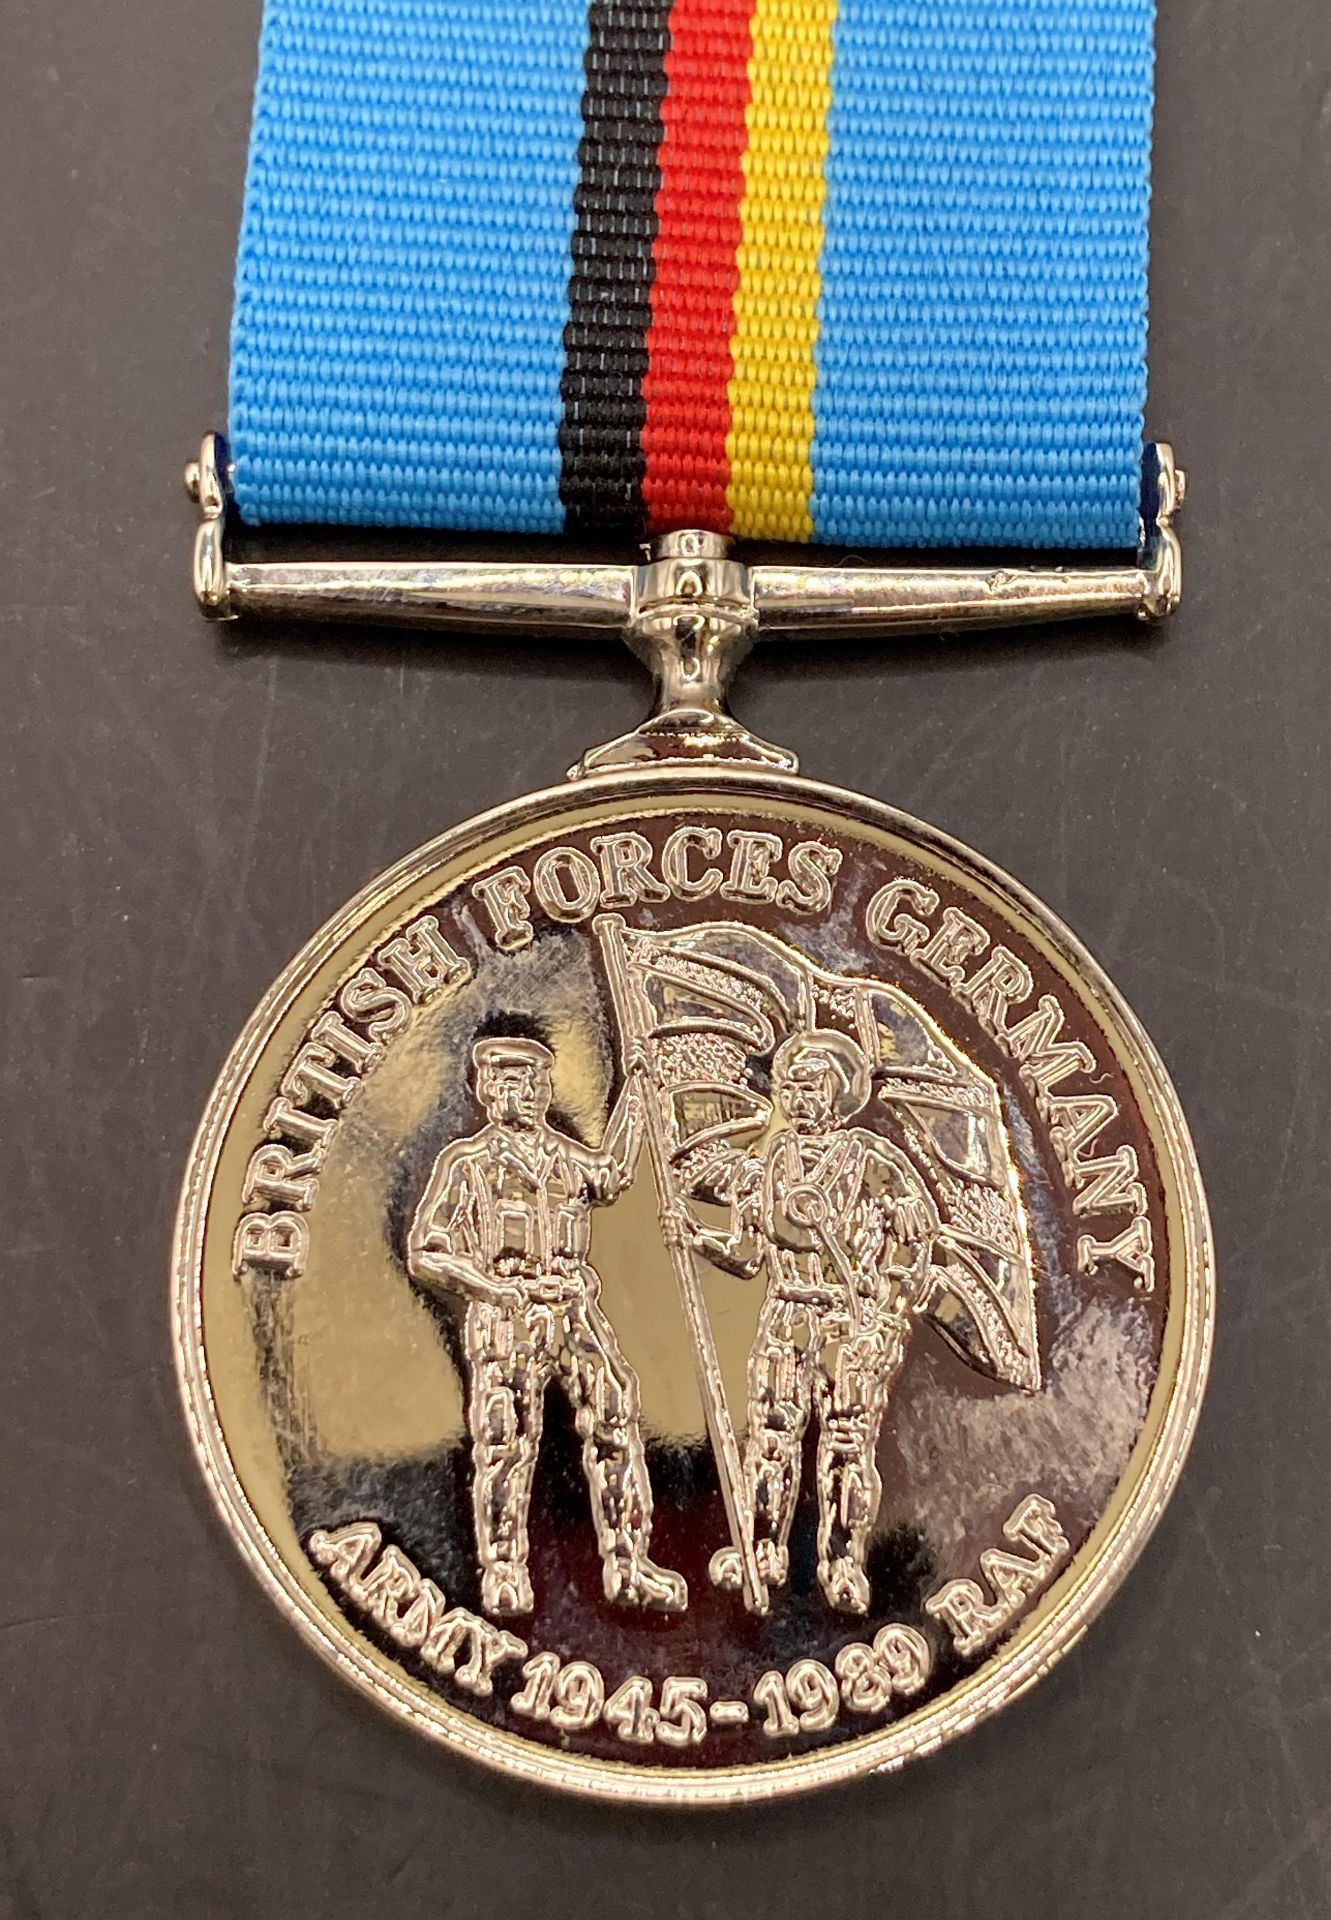 British Forces Germany Medal named to LT C.H. WHISTLER 1945-1946 RNVR in box of issue. - Image 2 of 3